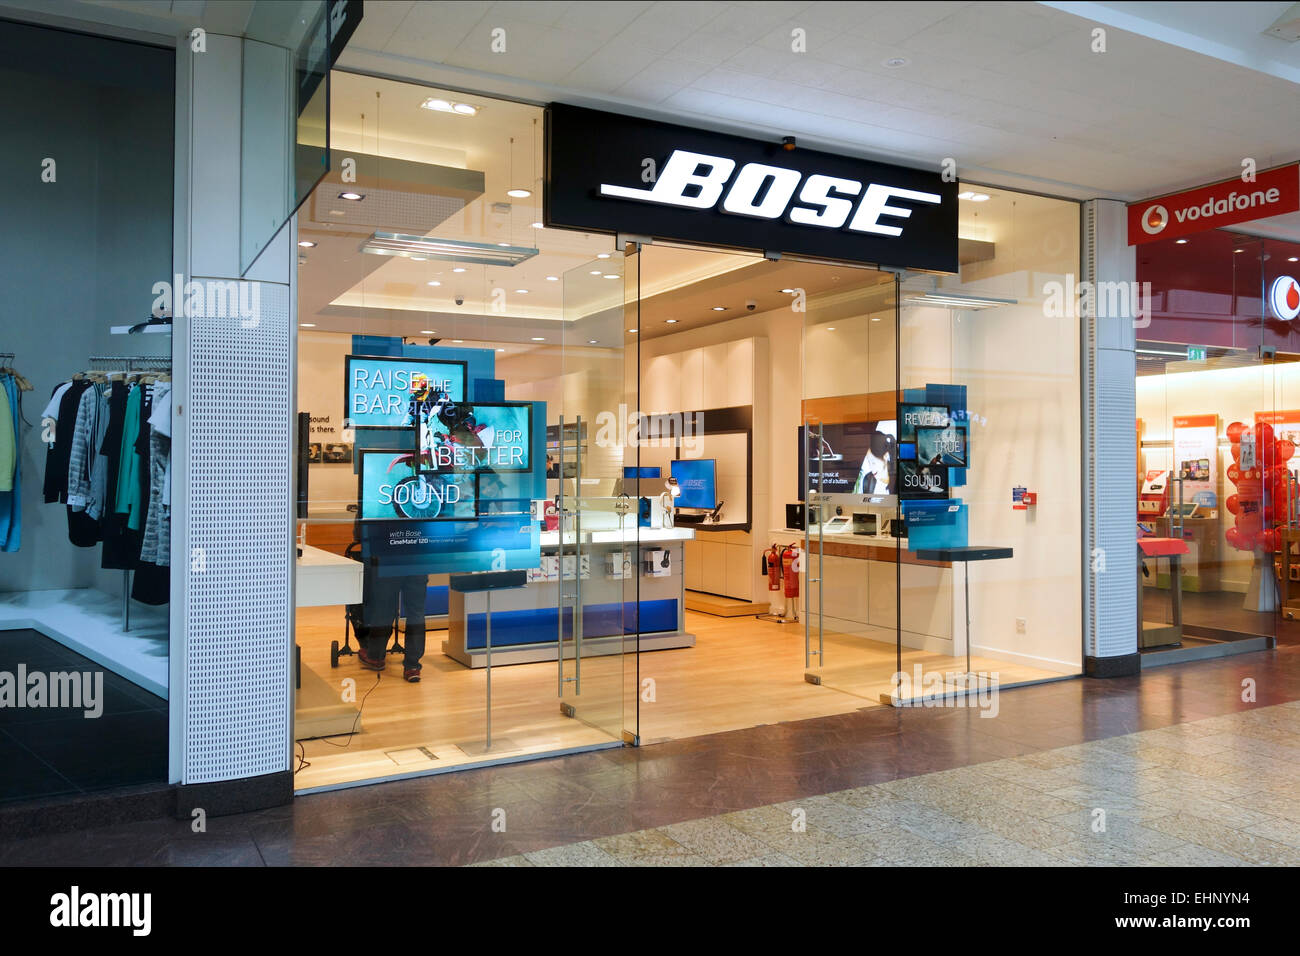 Bose Store High Resolution Stock Photography and Images - Alamy